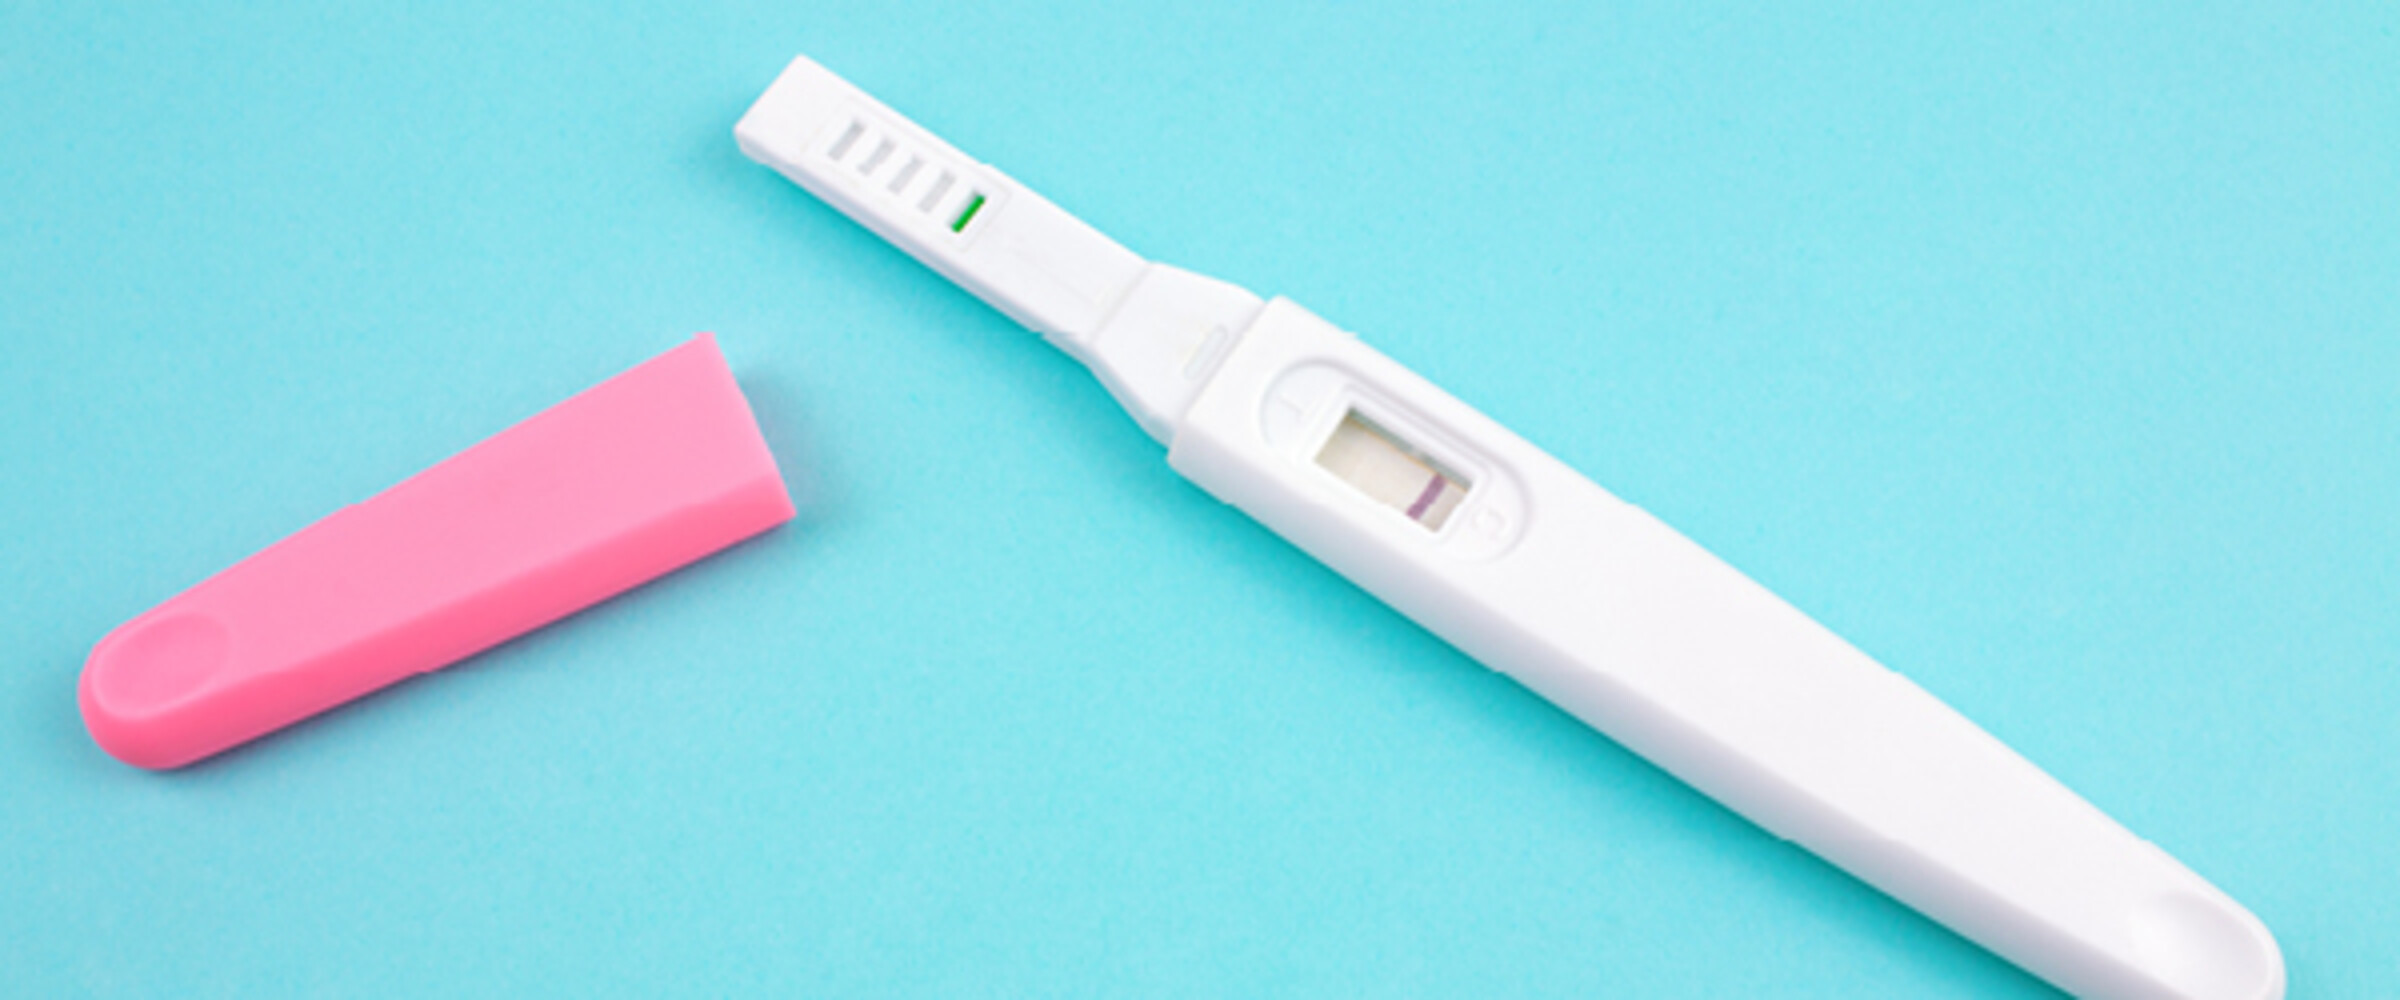 Smaller LMIYY pregnancy test image